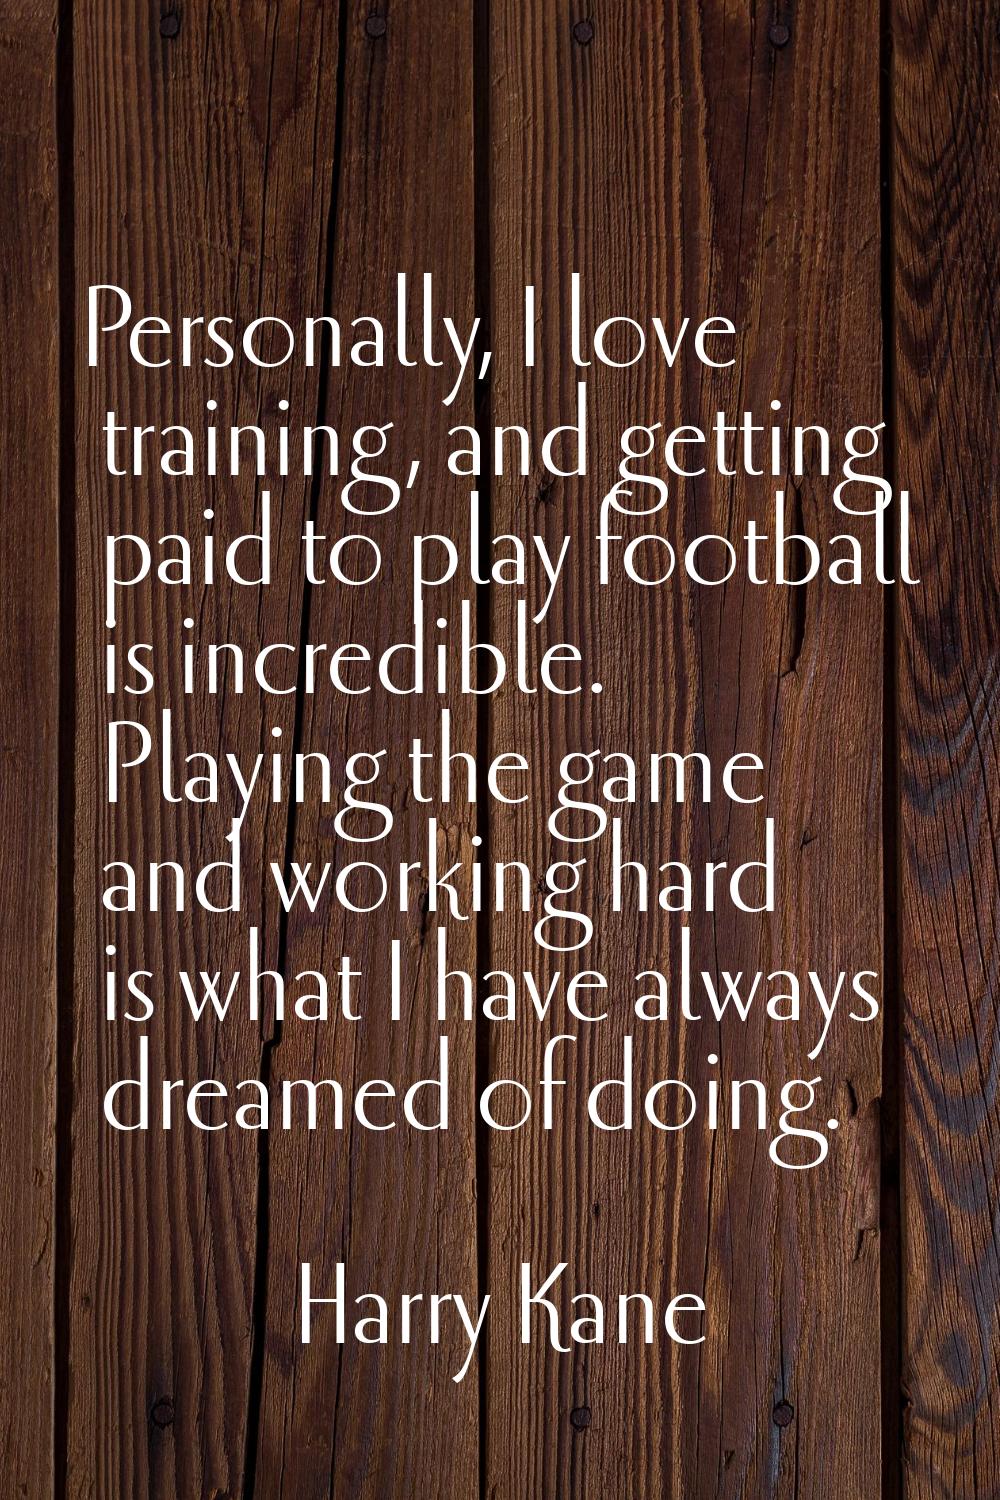 Personally, I love training, and getting paid to play football is incredible. Playing the game and 